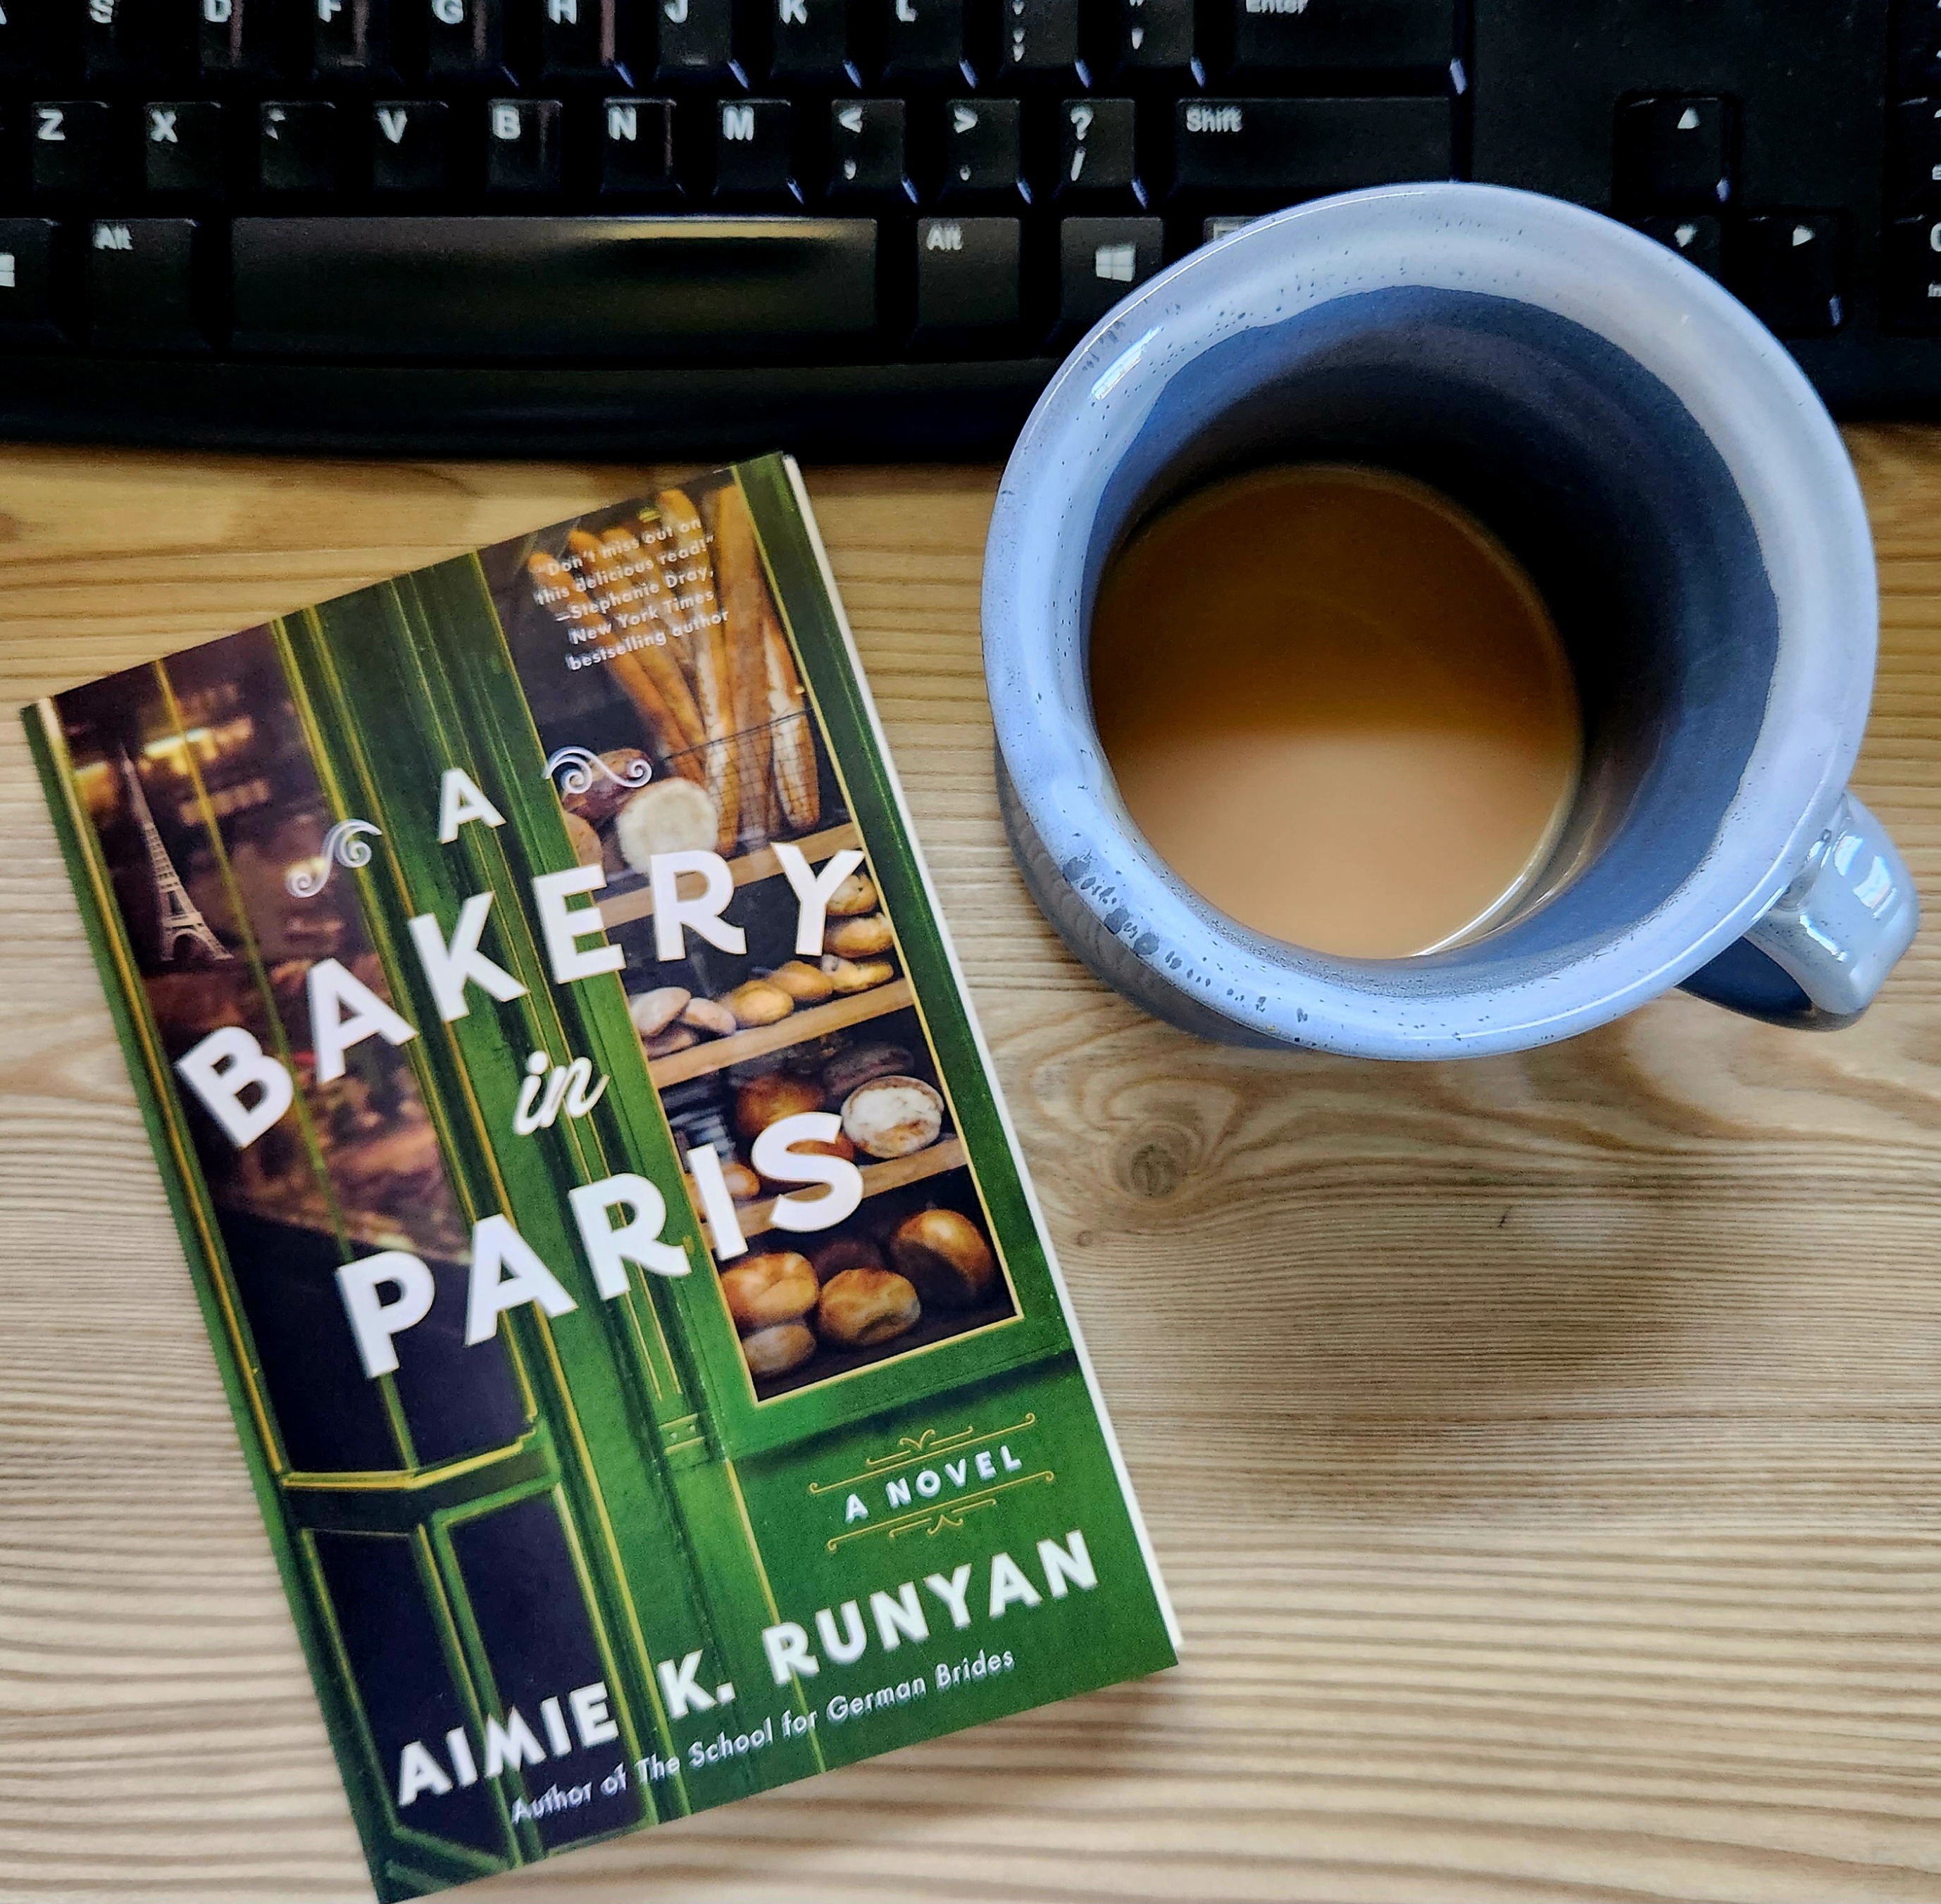 Book Review of A BAKERY IN PARIS